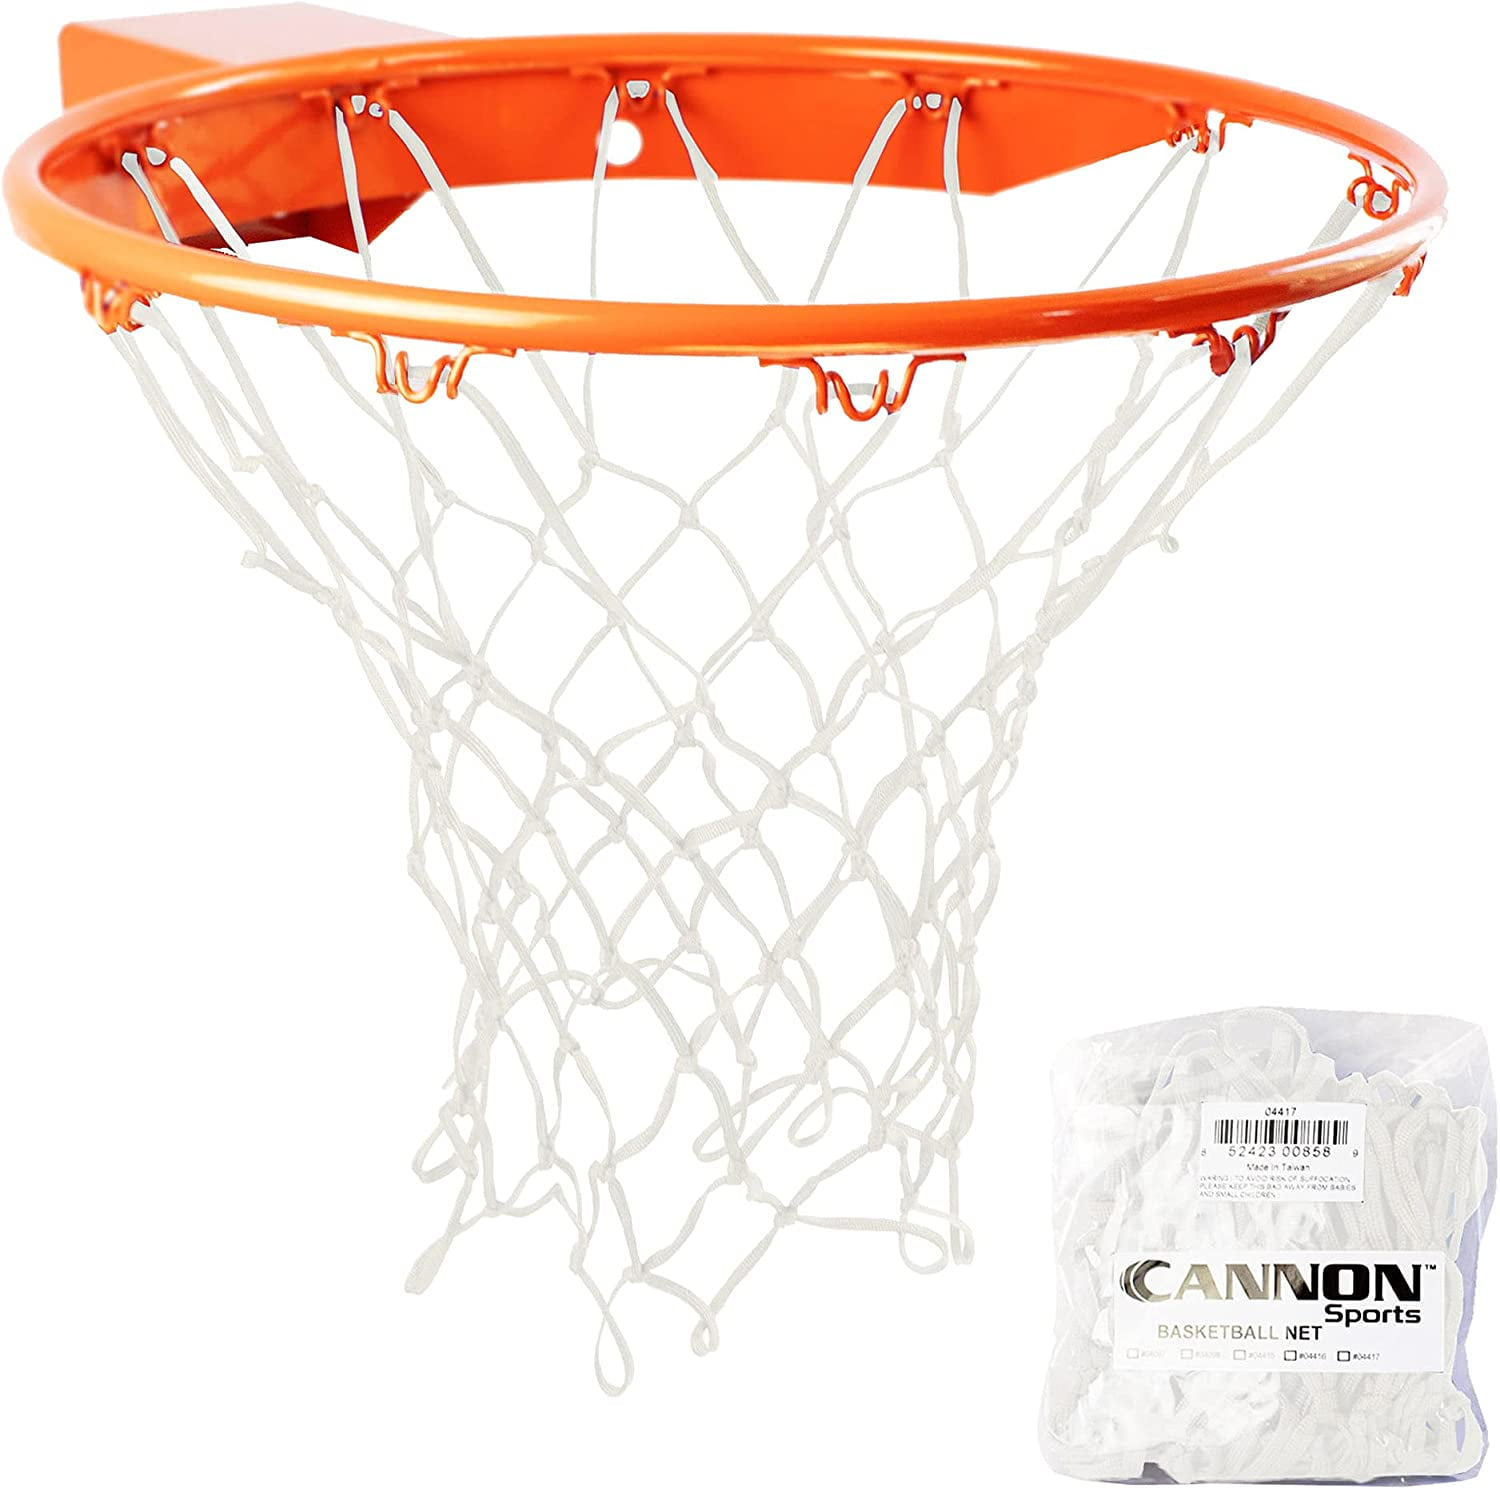 Red/White/Blue Details about   Spalding Basketball Net All-Weather 